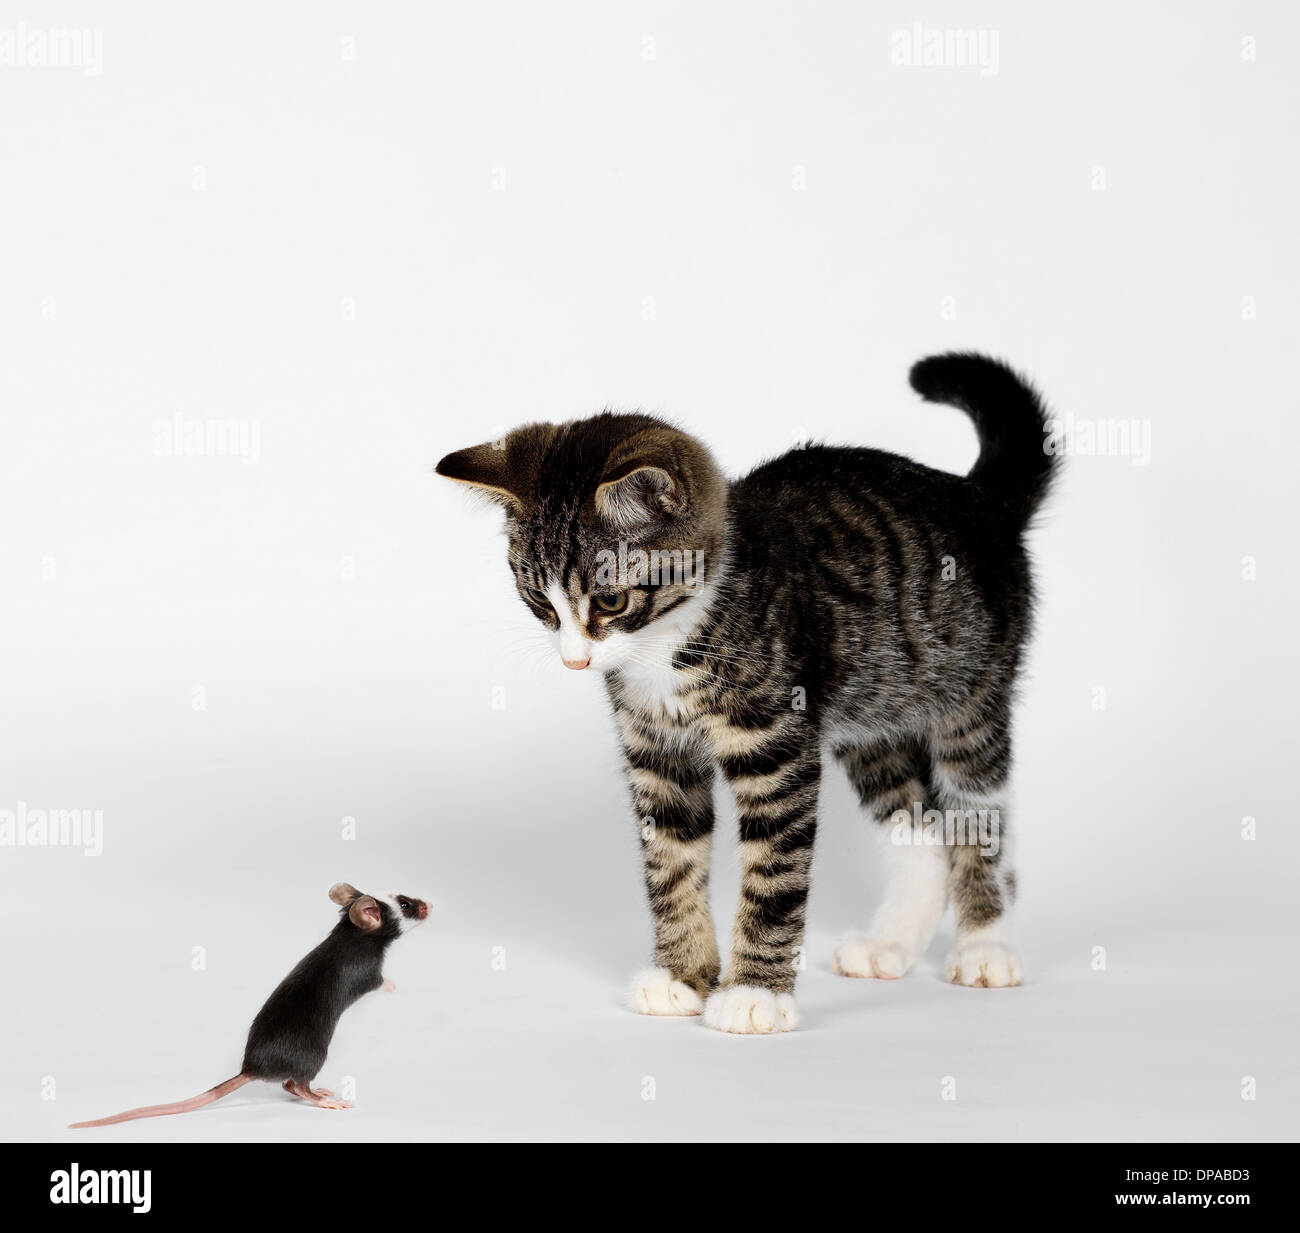 Mouse confronting kitten Stock Photo